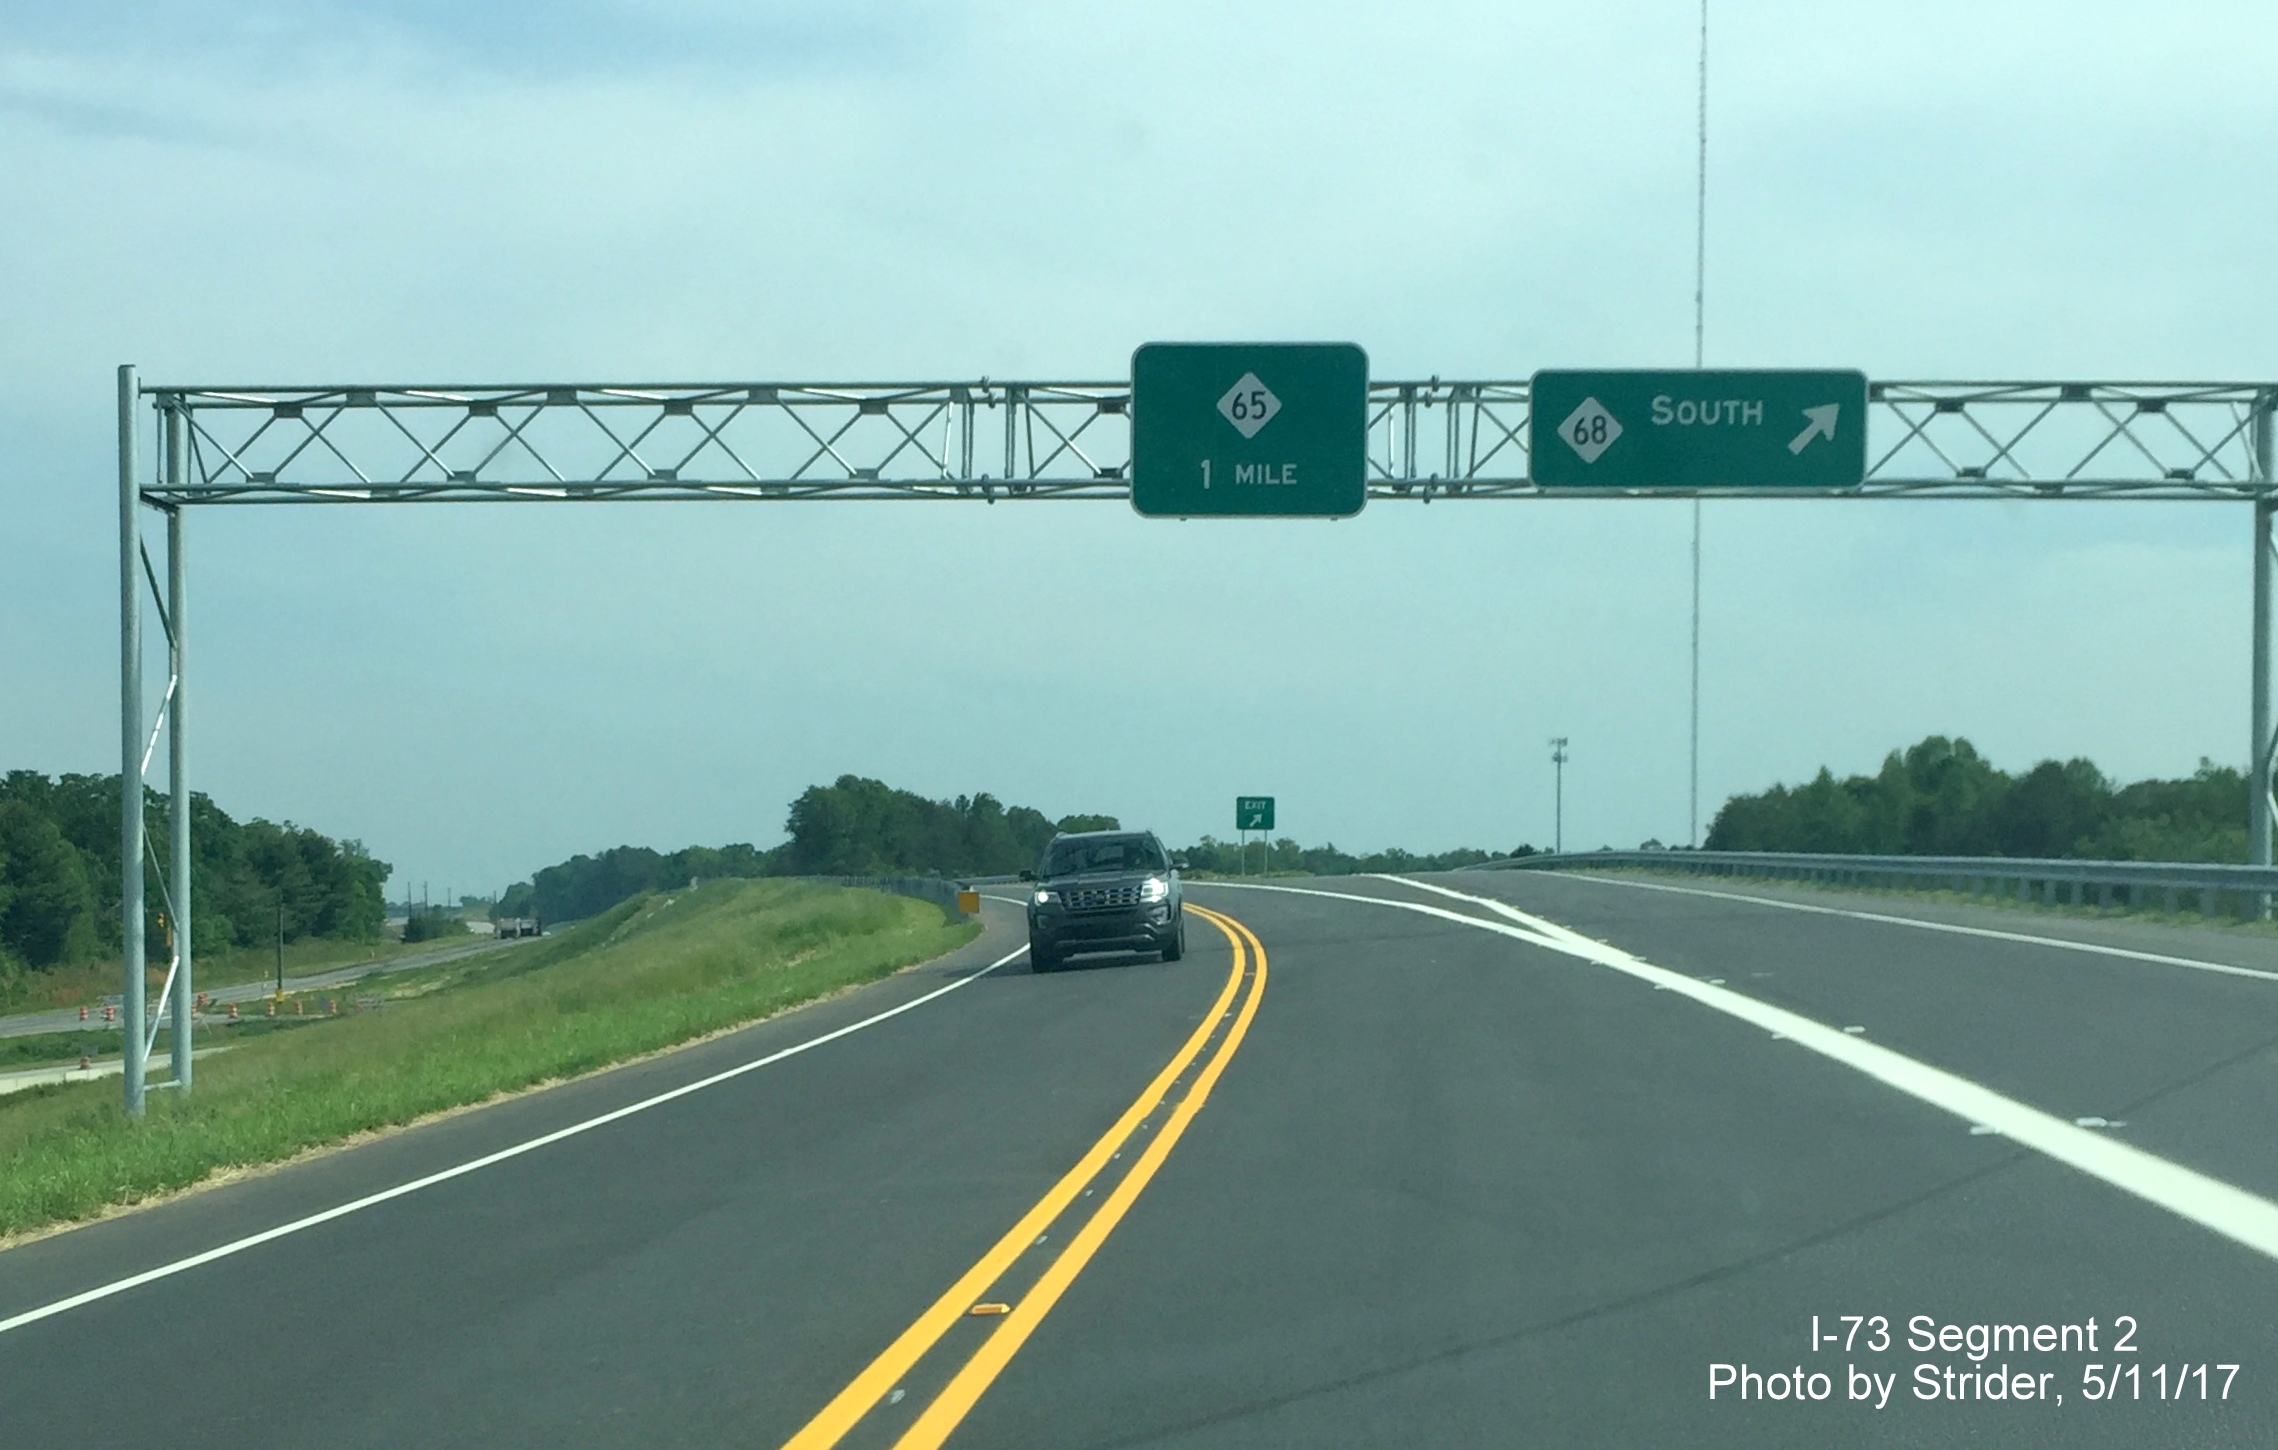 Image taken of overhead exit signage above US 220/Future I-73 South at NC 68 exit in Rockingham County, by Strider